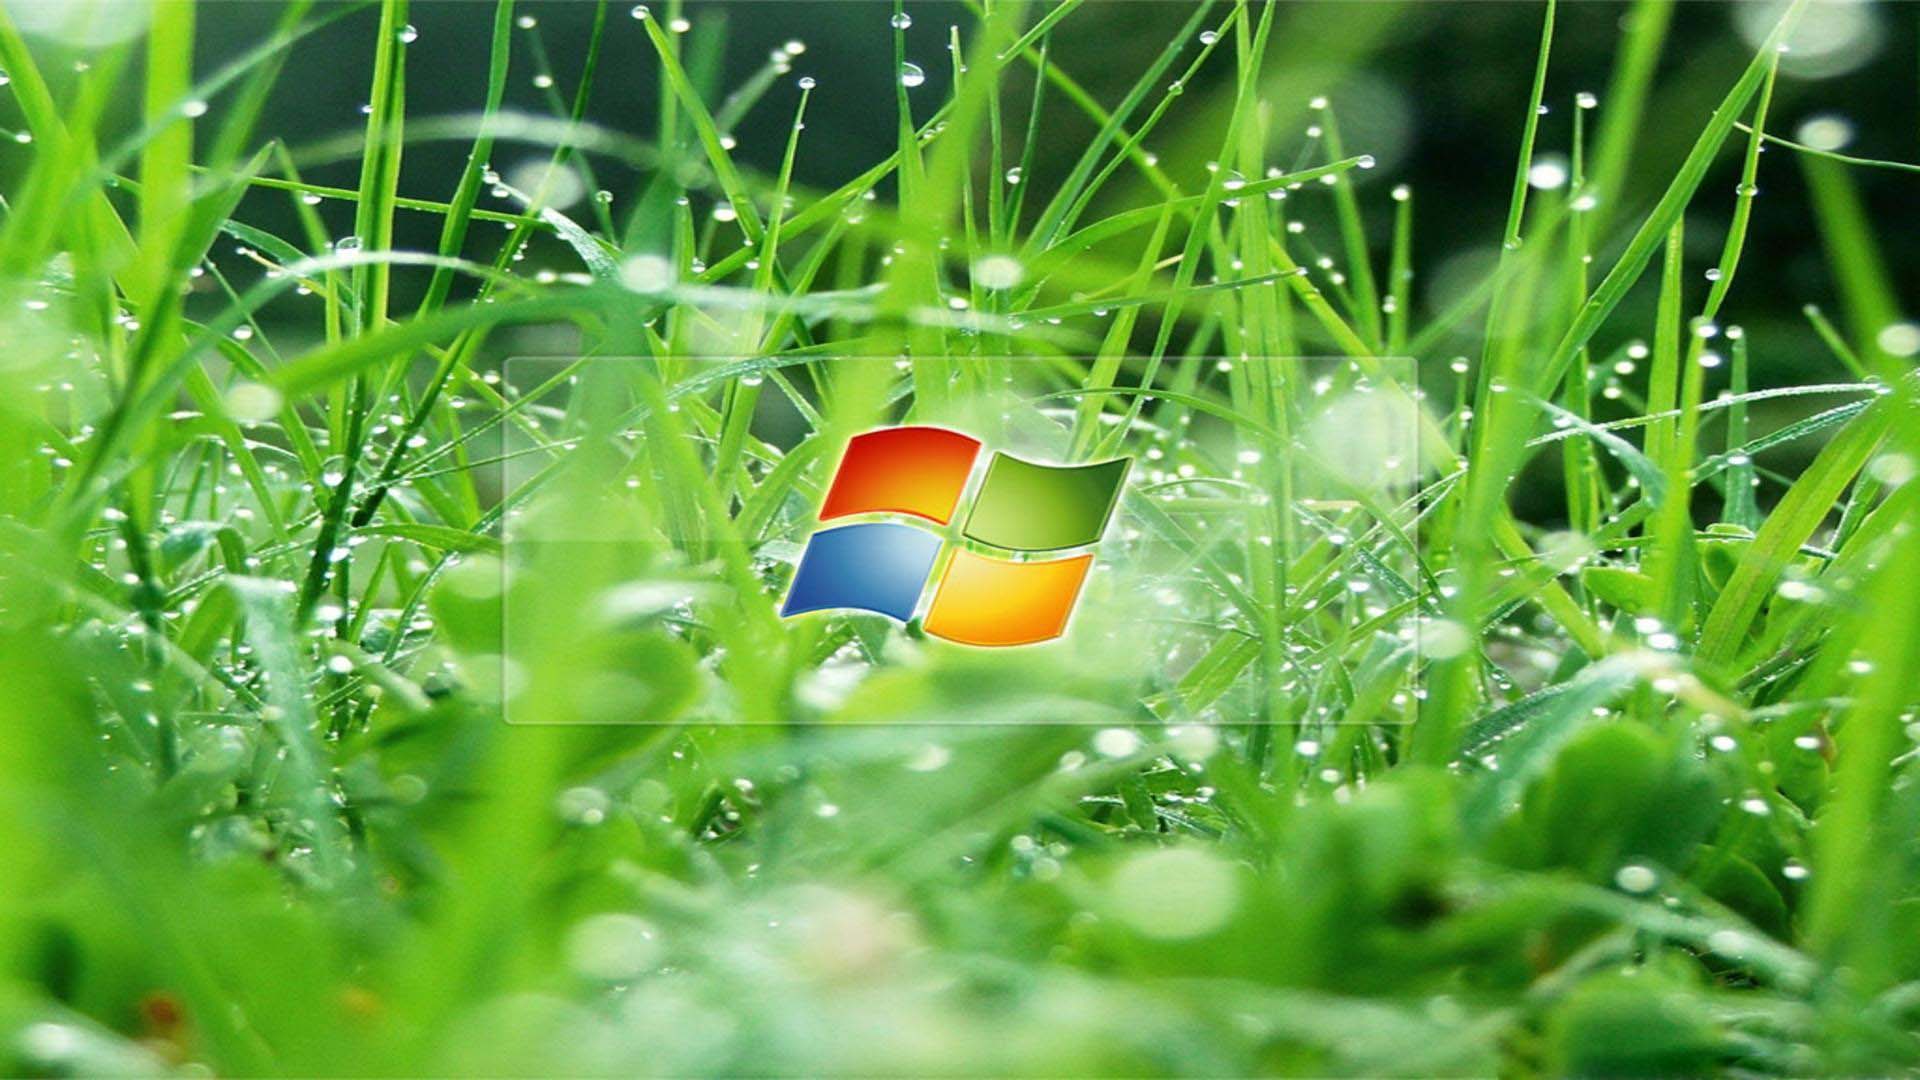 Windows 8 3D Wallpapers - Wallpaper Cave Full Hd Wallpapers For Windows 8 1920x1080